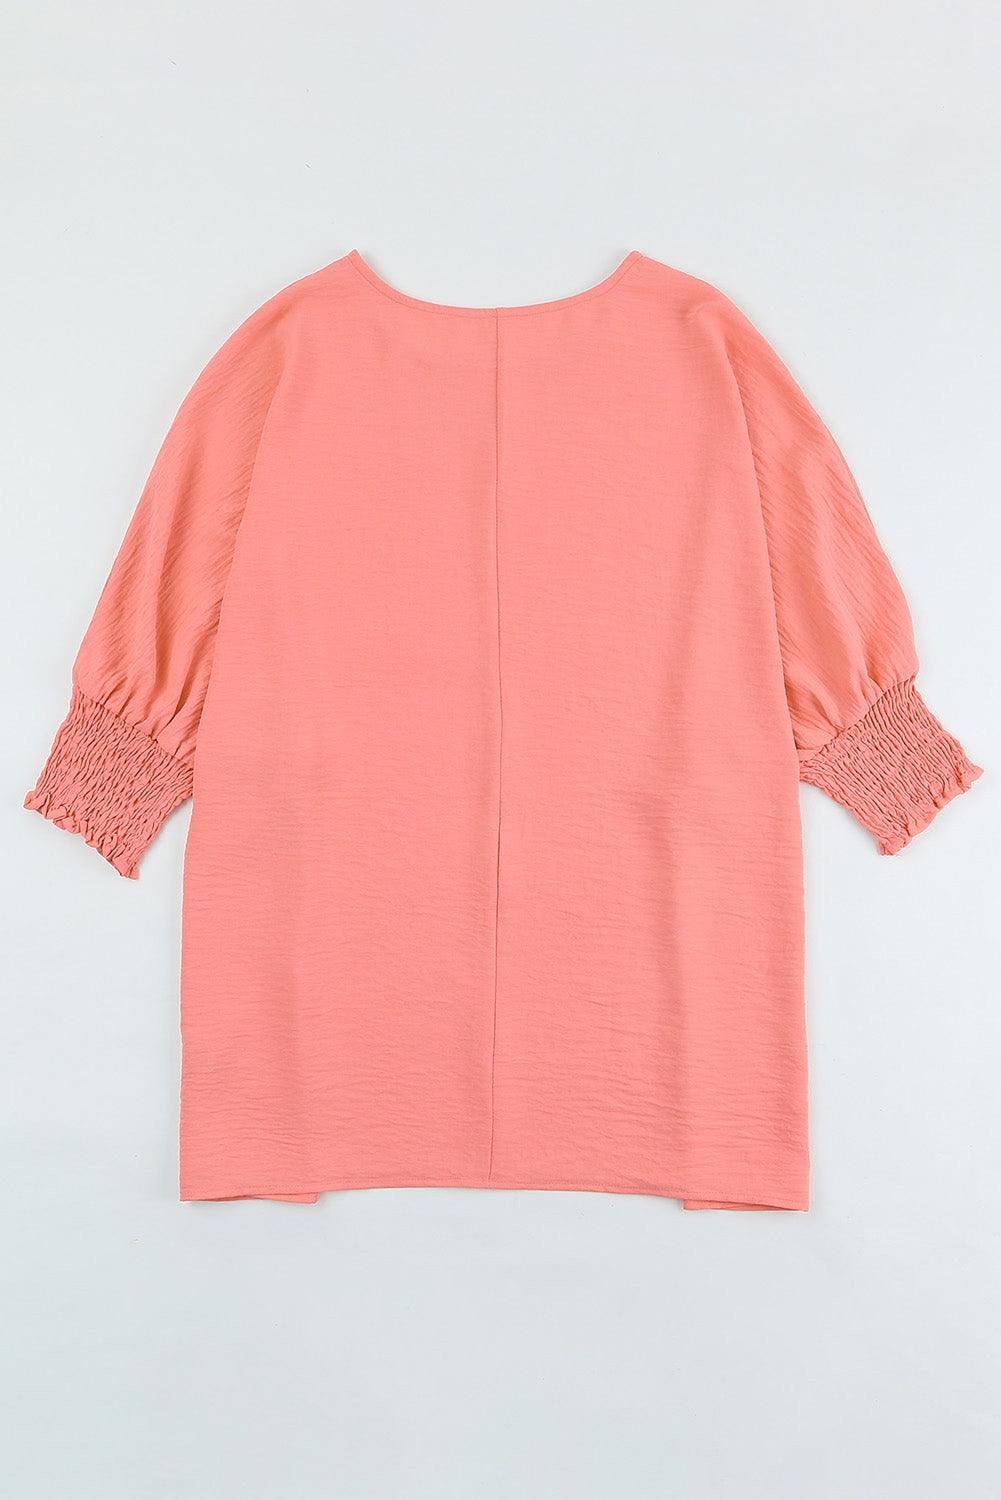 Smocked Wrist Shift Pink Top Blouse for Women